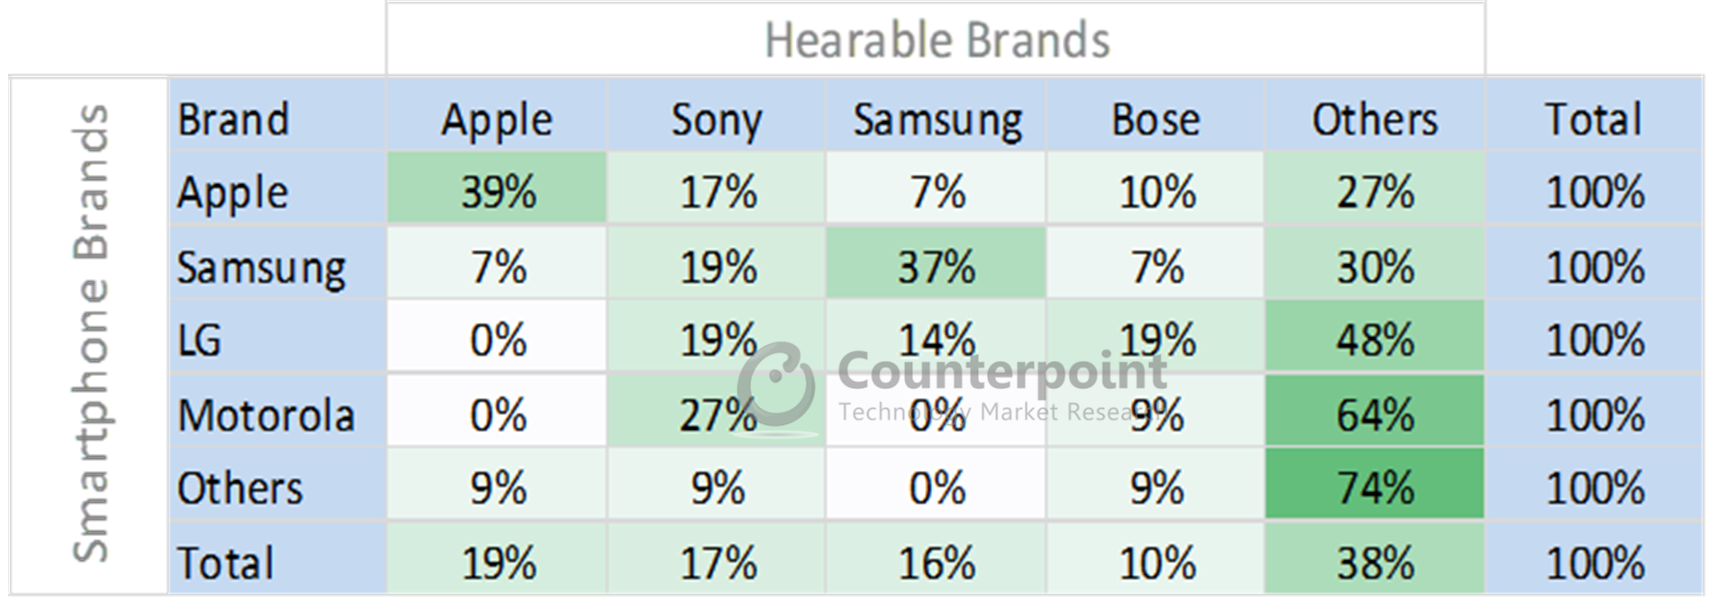 Hearables - Correlation between Smartphone and Hearable Brands